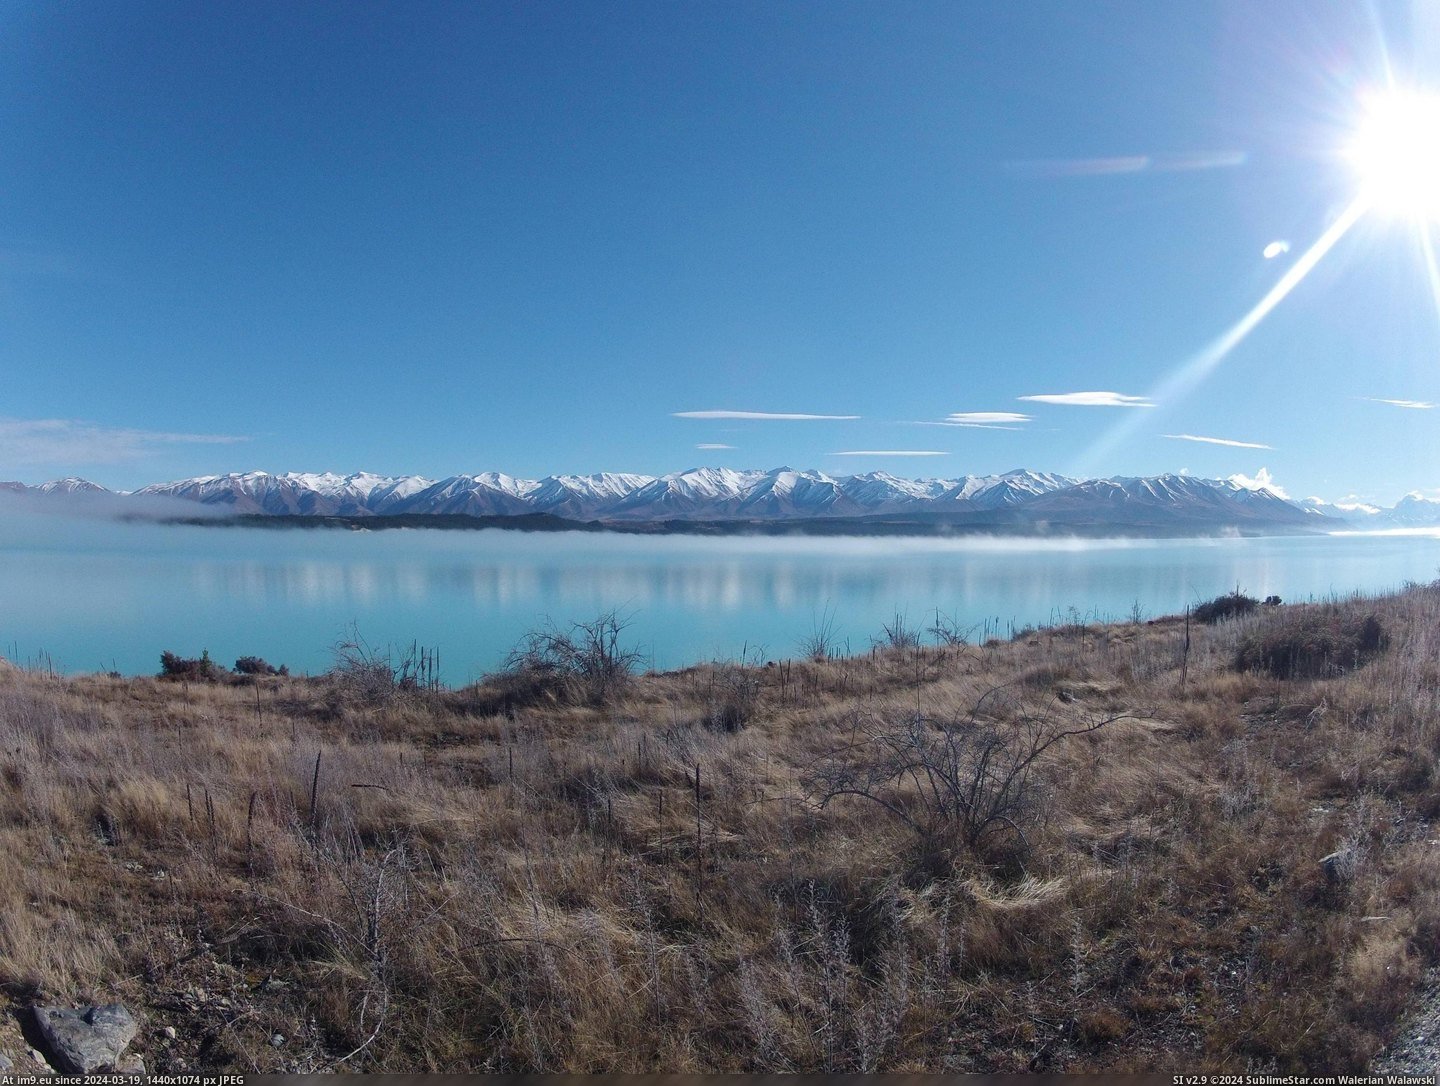 #Picture #Lake #Tekapo #Zealand #3840x2880 [Earthporn] A picture I took of Lake Tekapo, New Zealand in July 2013 [OC] [3840x2880] Pic. (Изображение из альбом My r/EARTHPORN favs))